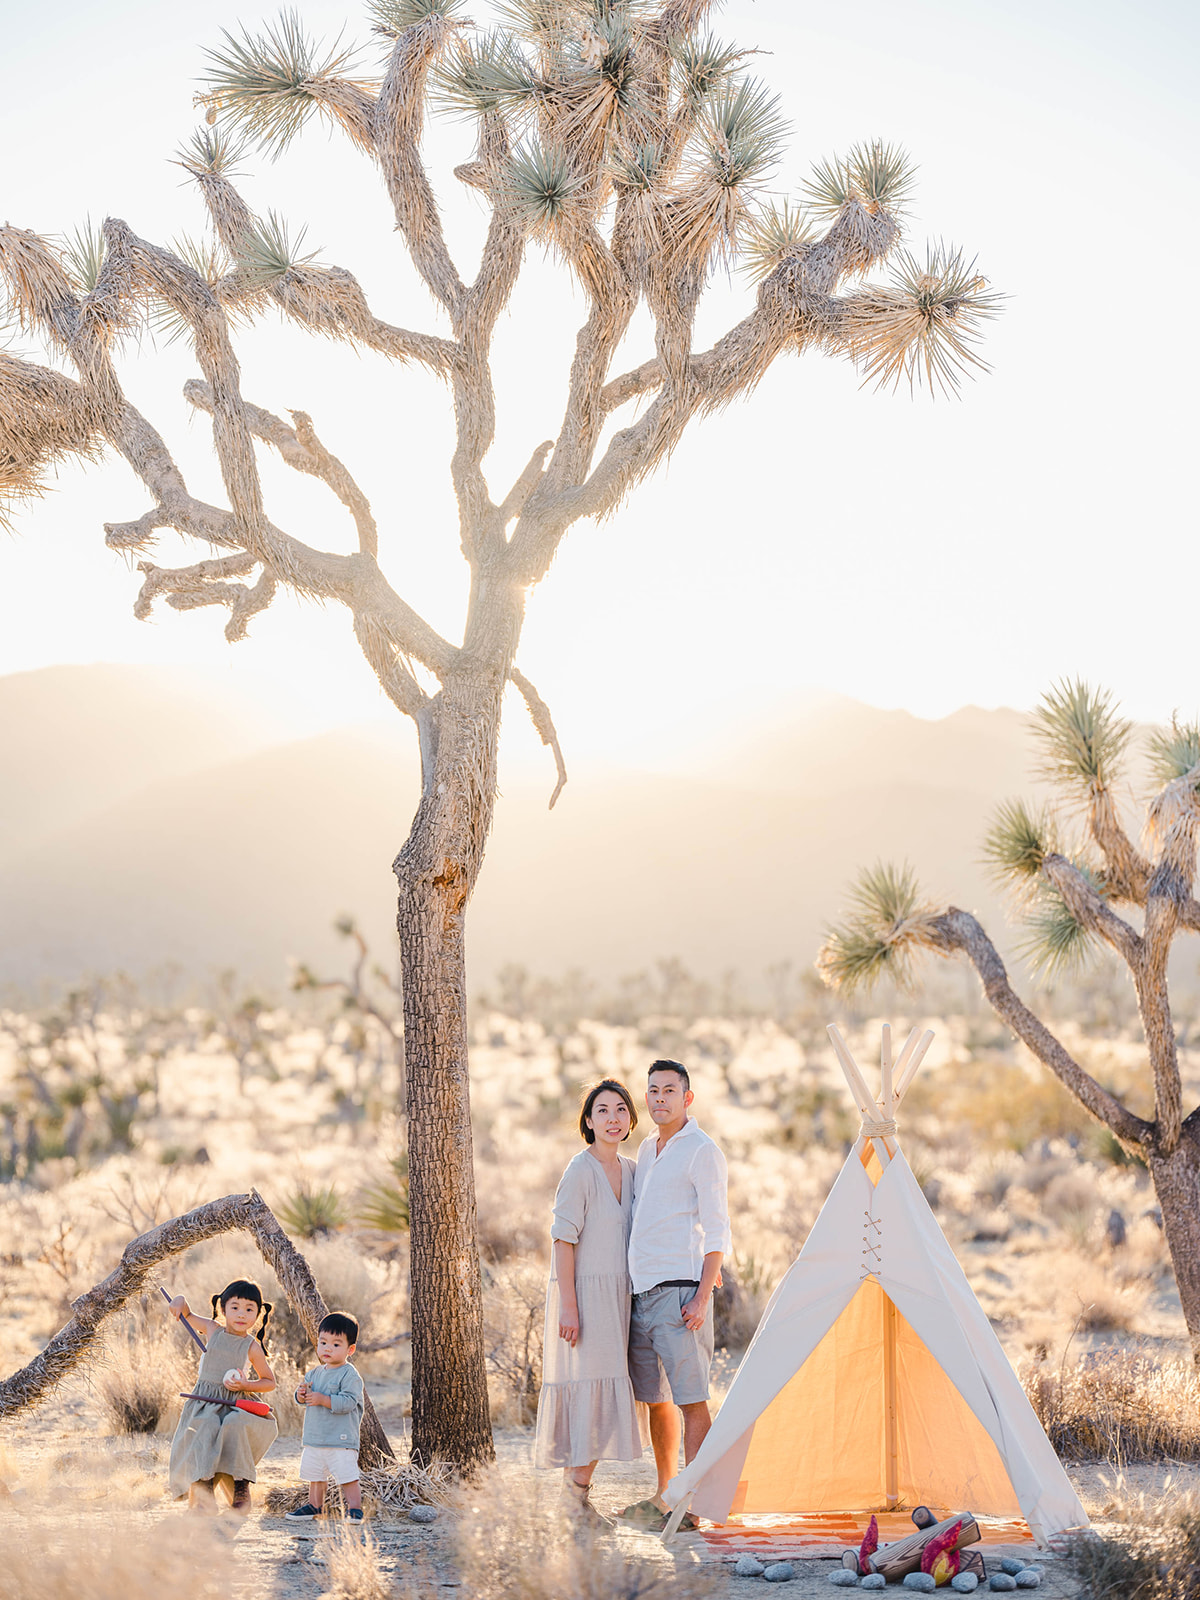 From family photo sessions to engagement and elopements, Joshua Tree portrait photography is stunning. There are so many beautiful scenes here, and the perfect spot to capture sunrise and sunset. #familyportrait #photography